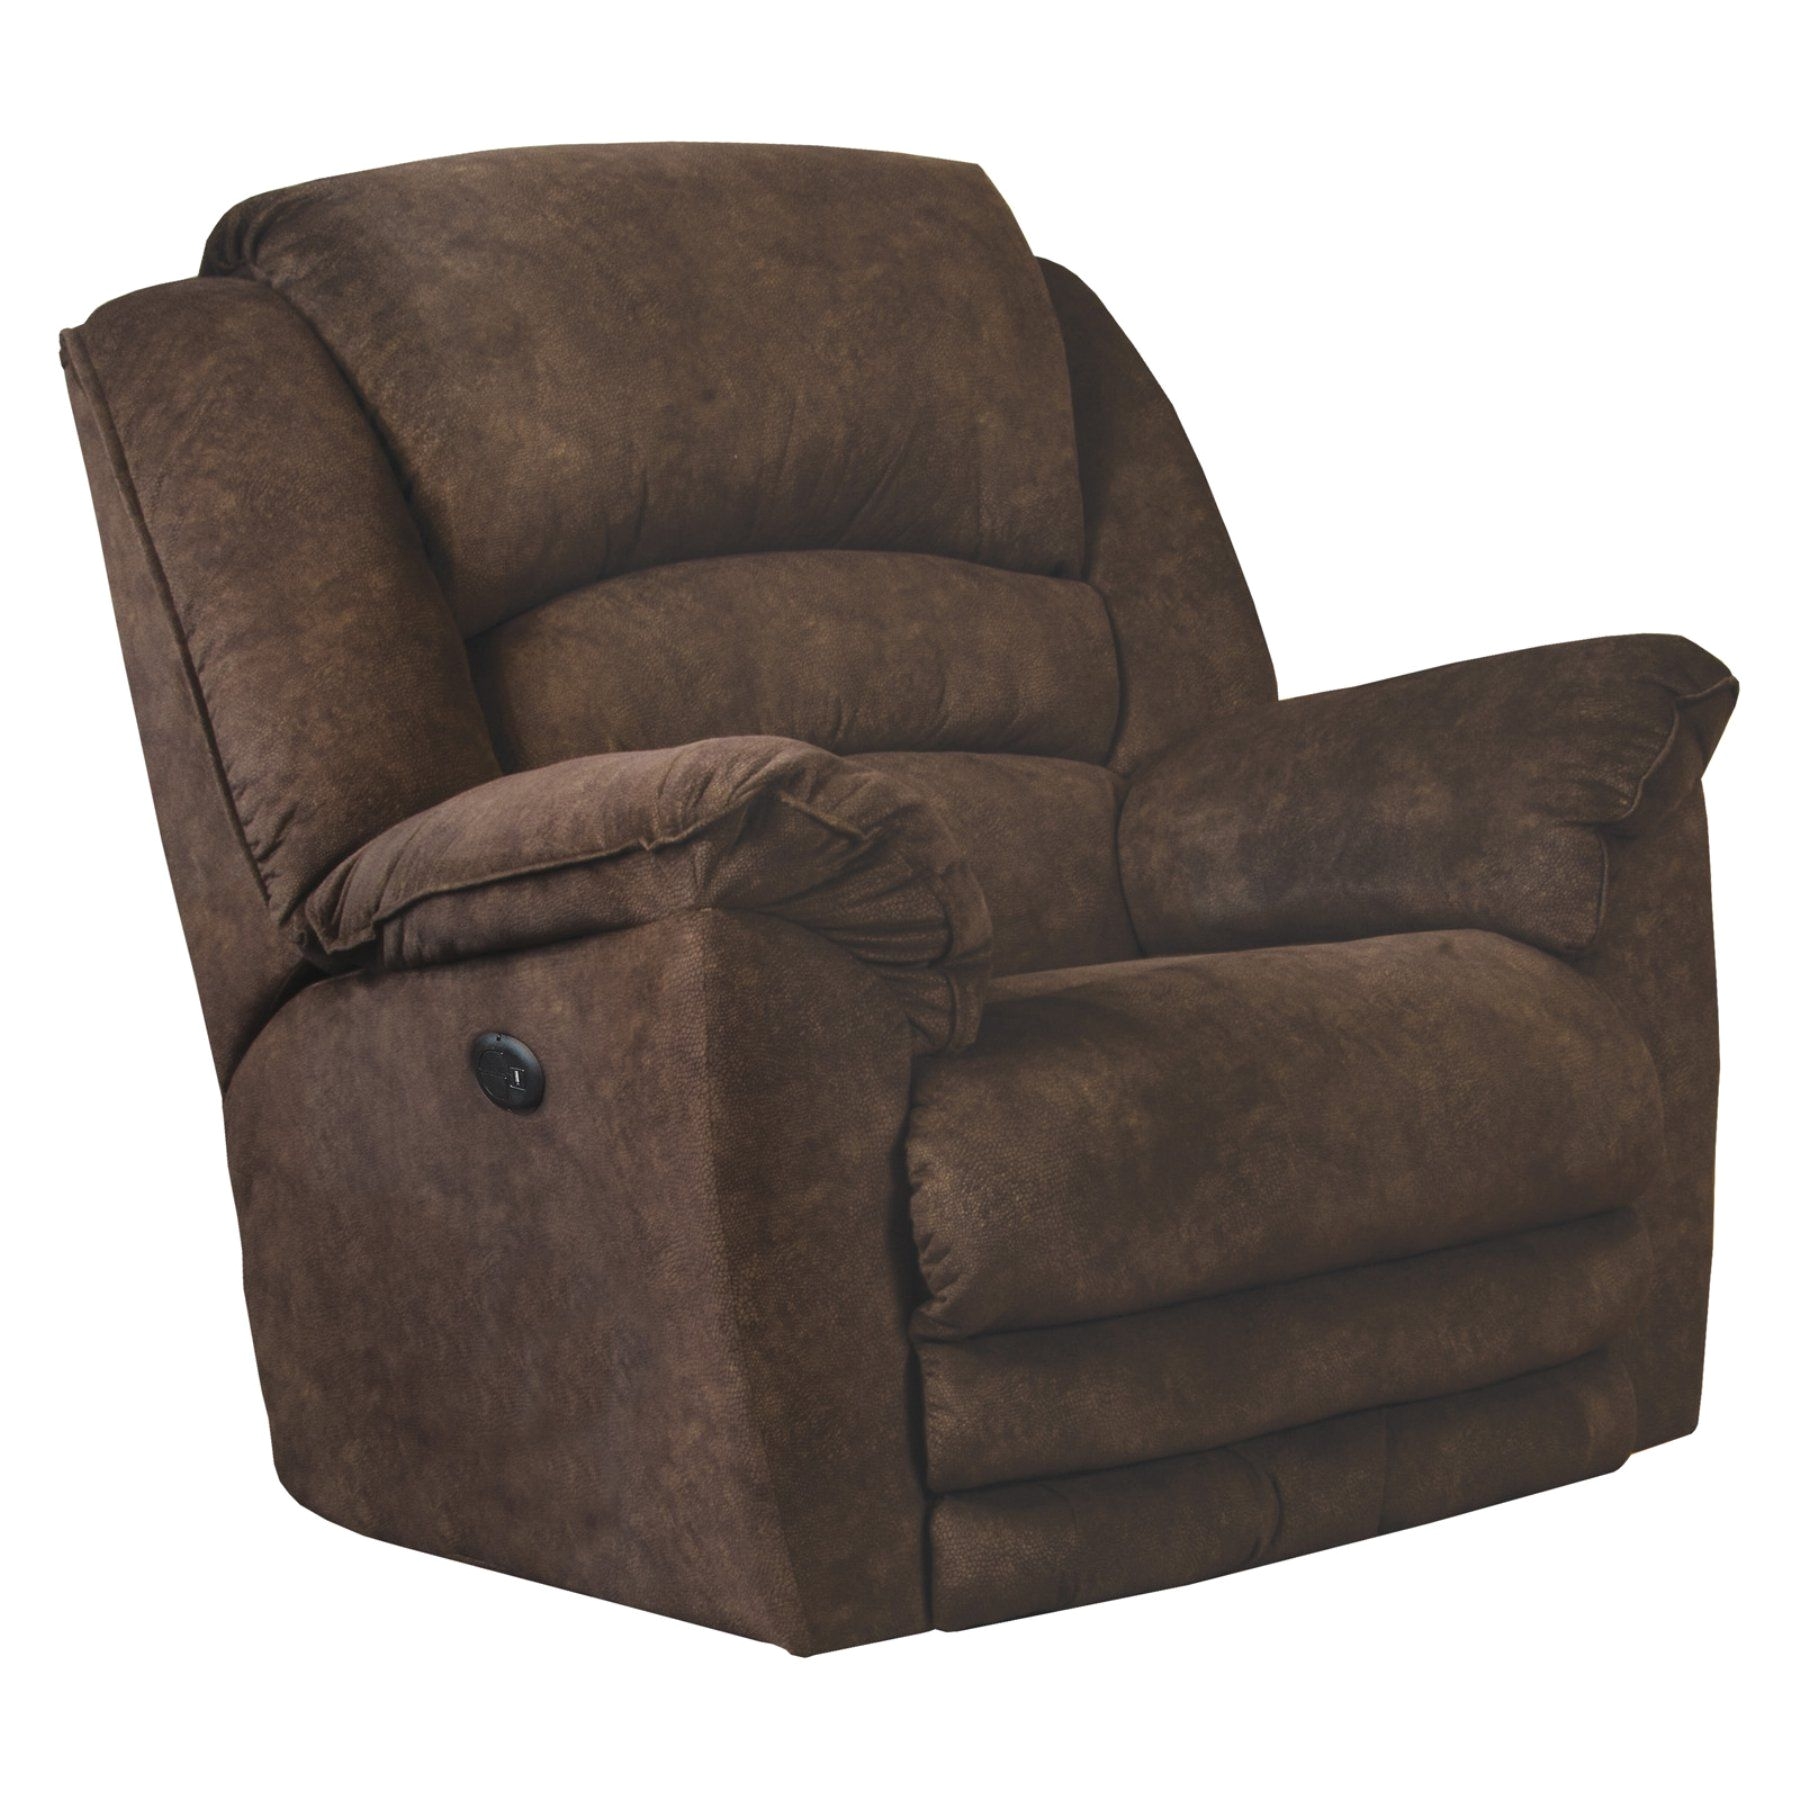 Lay Flat Power Recliner Chairs Catnapper Rialto Power Lay Flat Recliner with Extended Ottoman